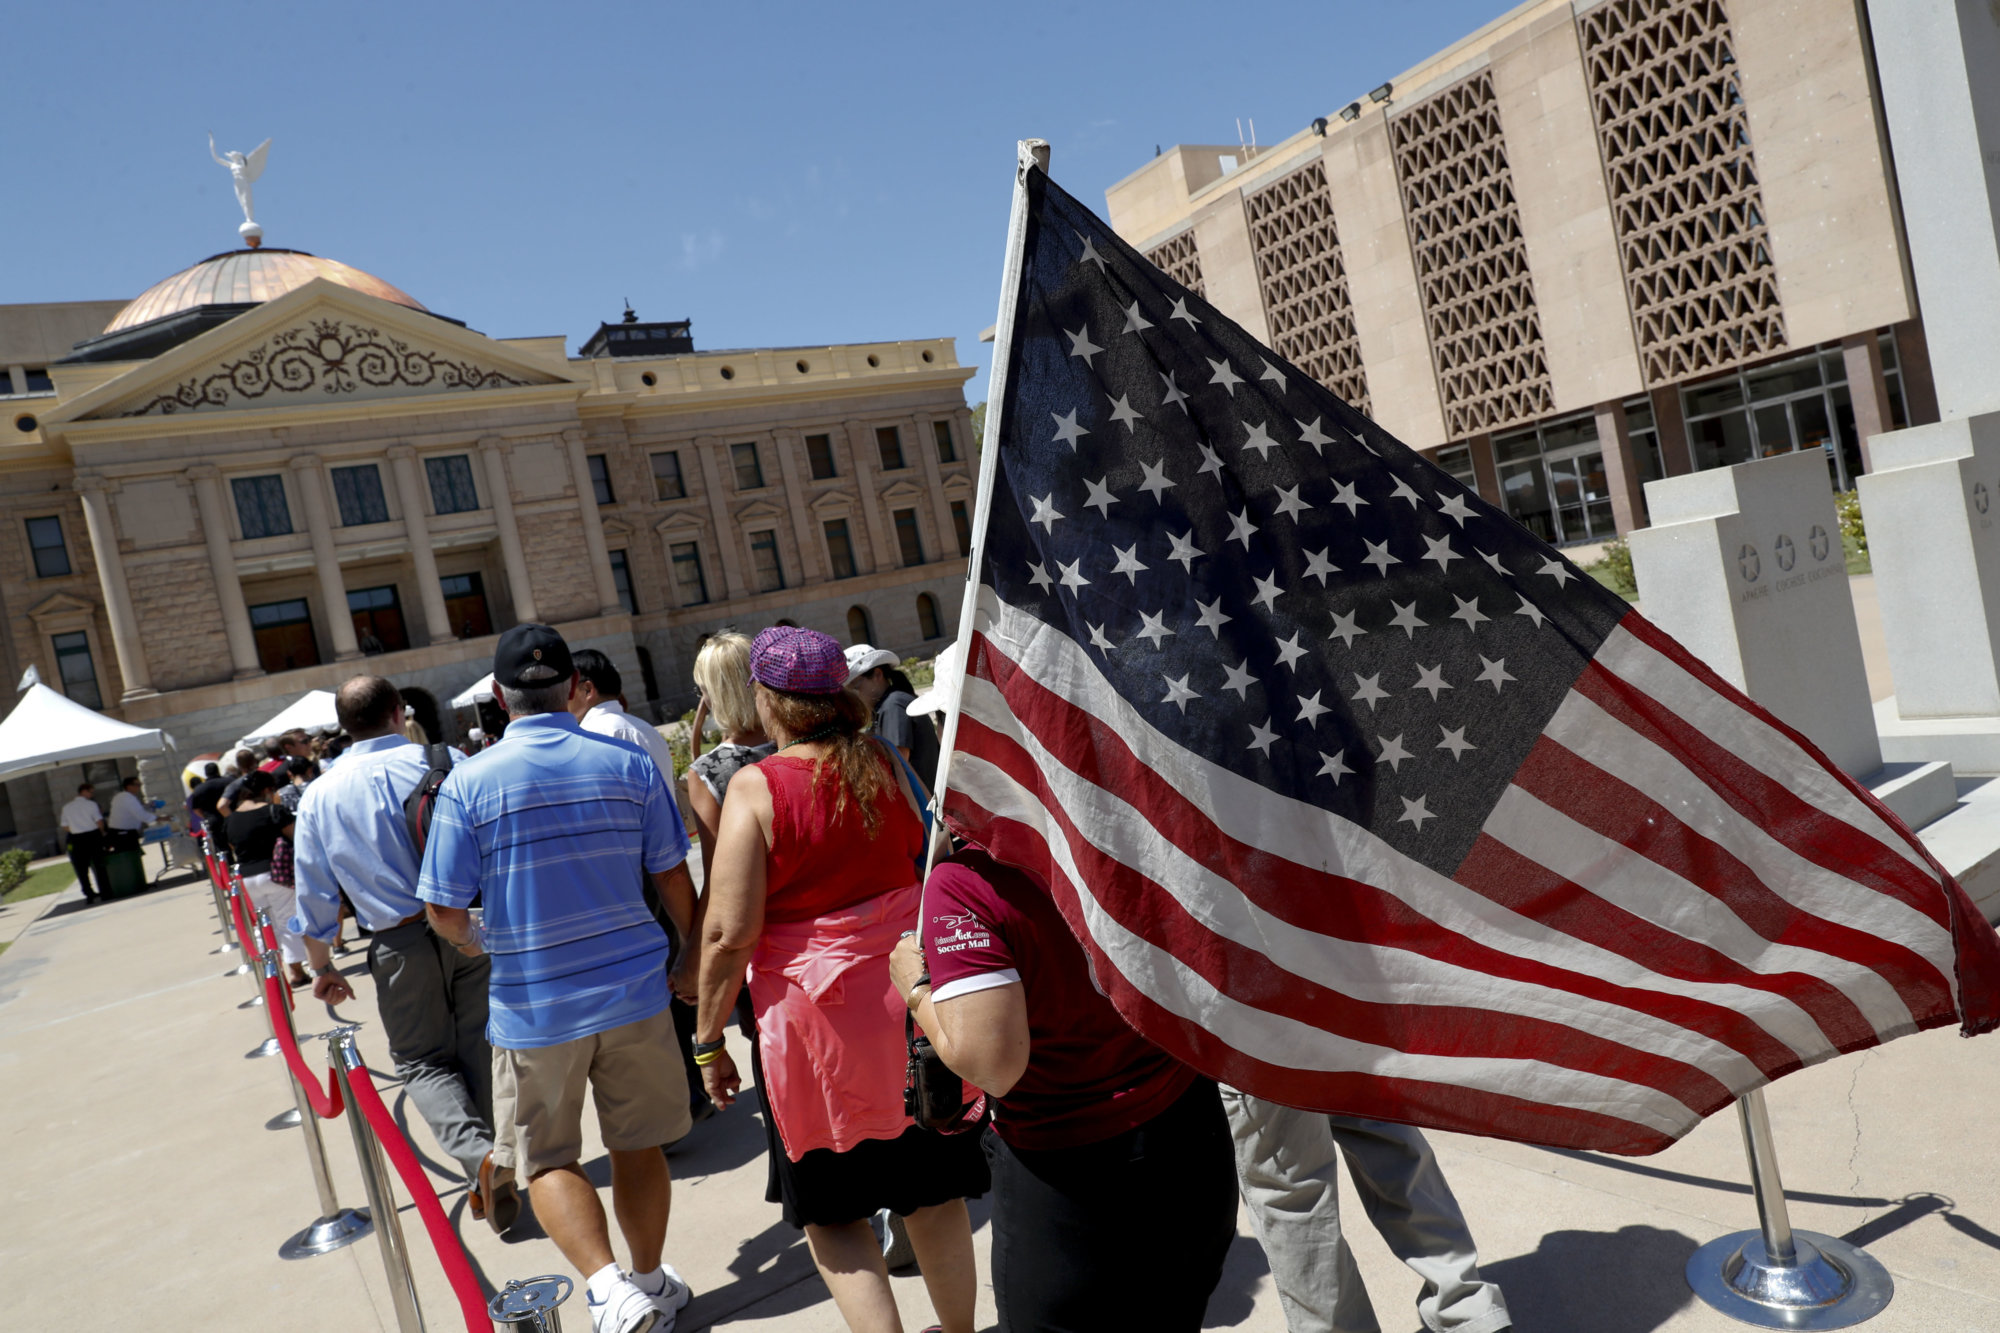 Members of the public line up to pay their respects to Sen. John McCain during a viewing at the Arizona Capitol on Wednesday, Aug. 29, 2018, in Phoenix. (AP Photo/Matt York)